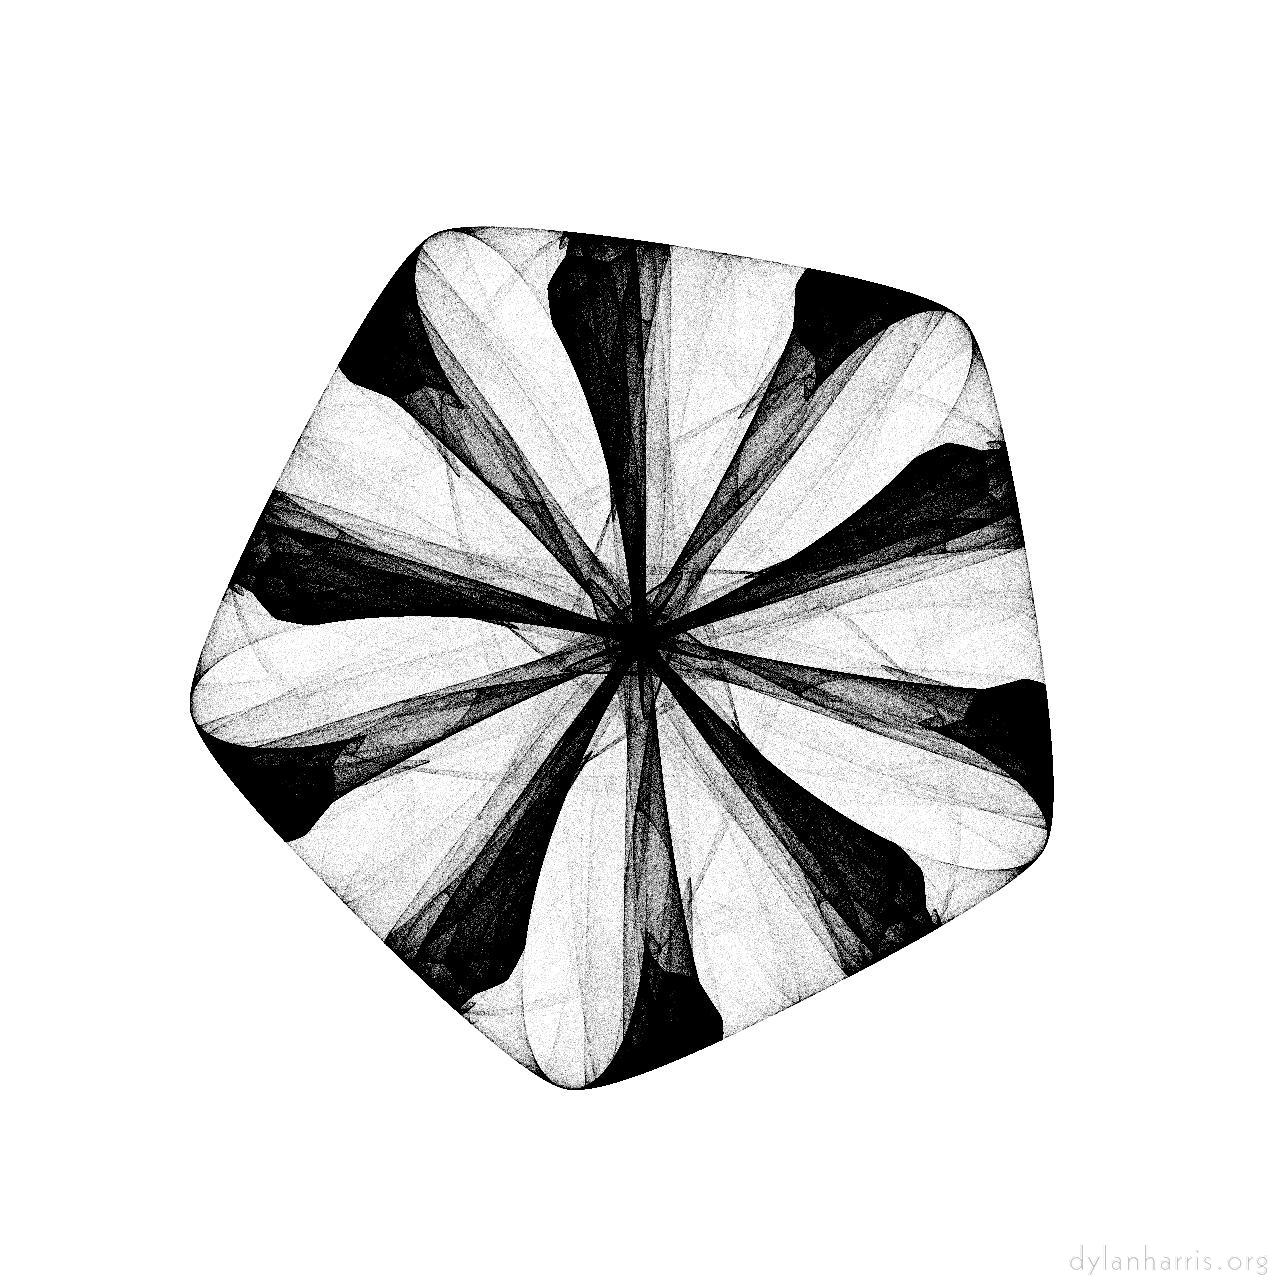 image: bw attractor :: shell